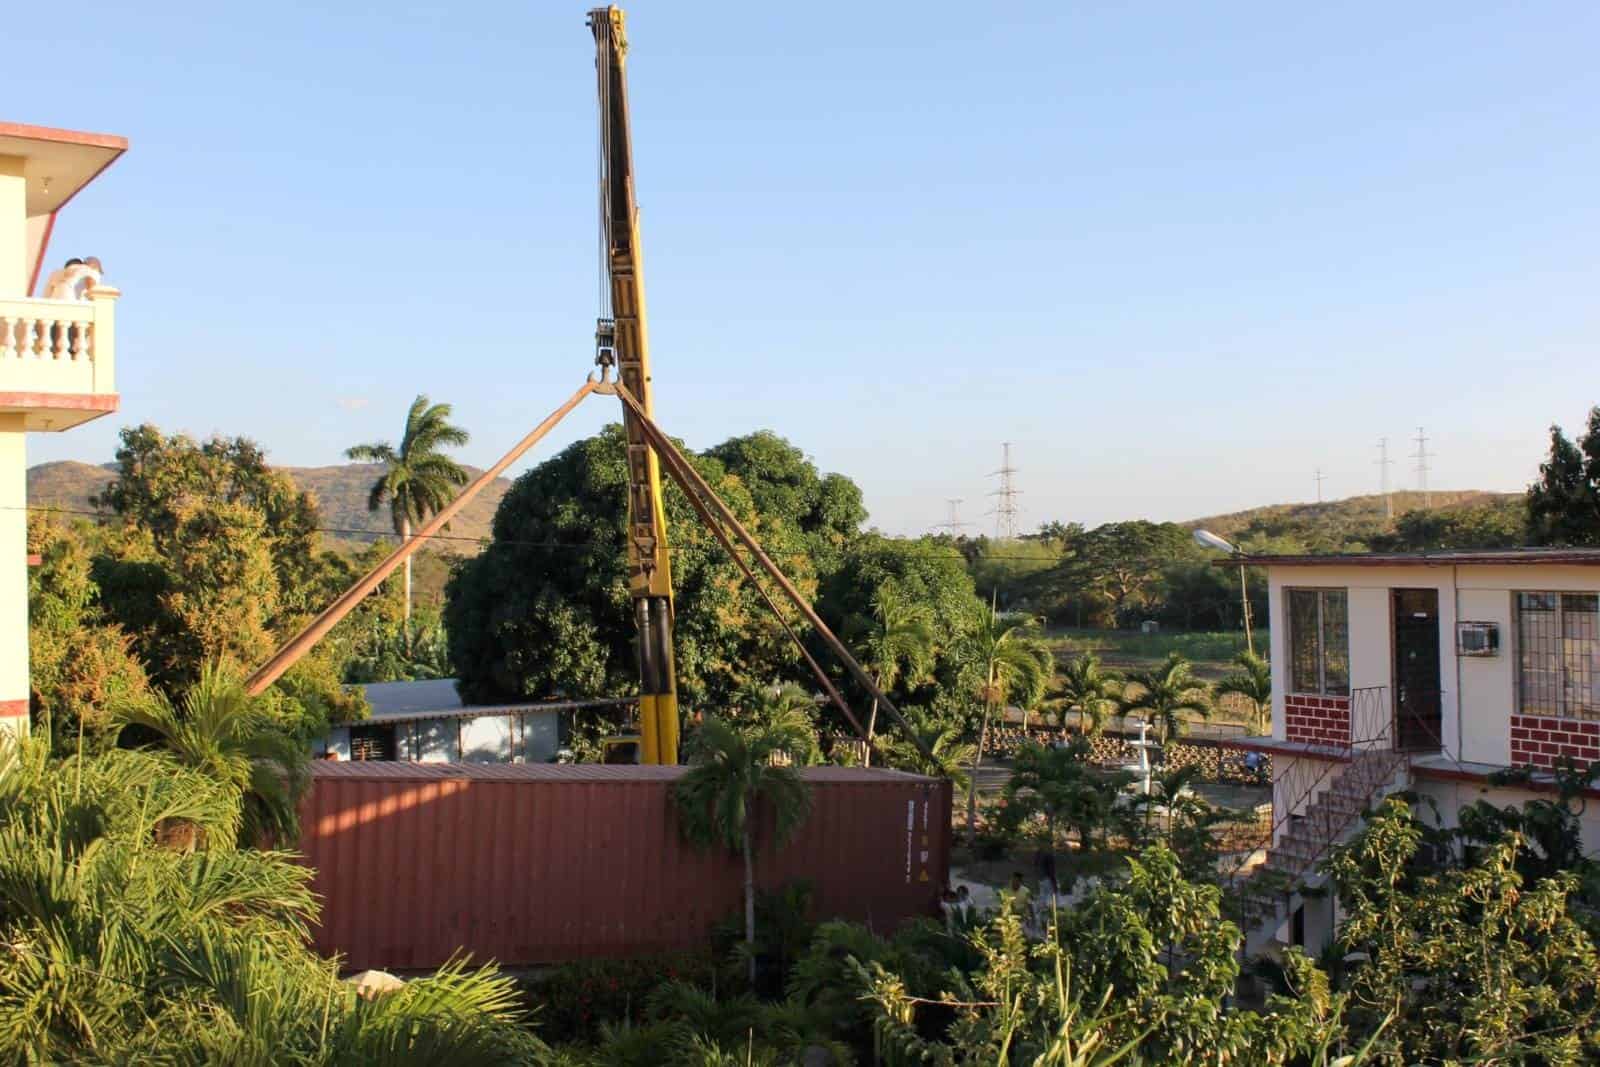 A Shipping Container Carefully Lowered on a Property through a Crane